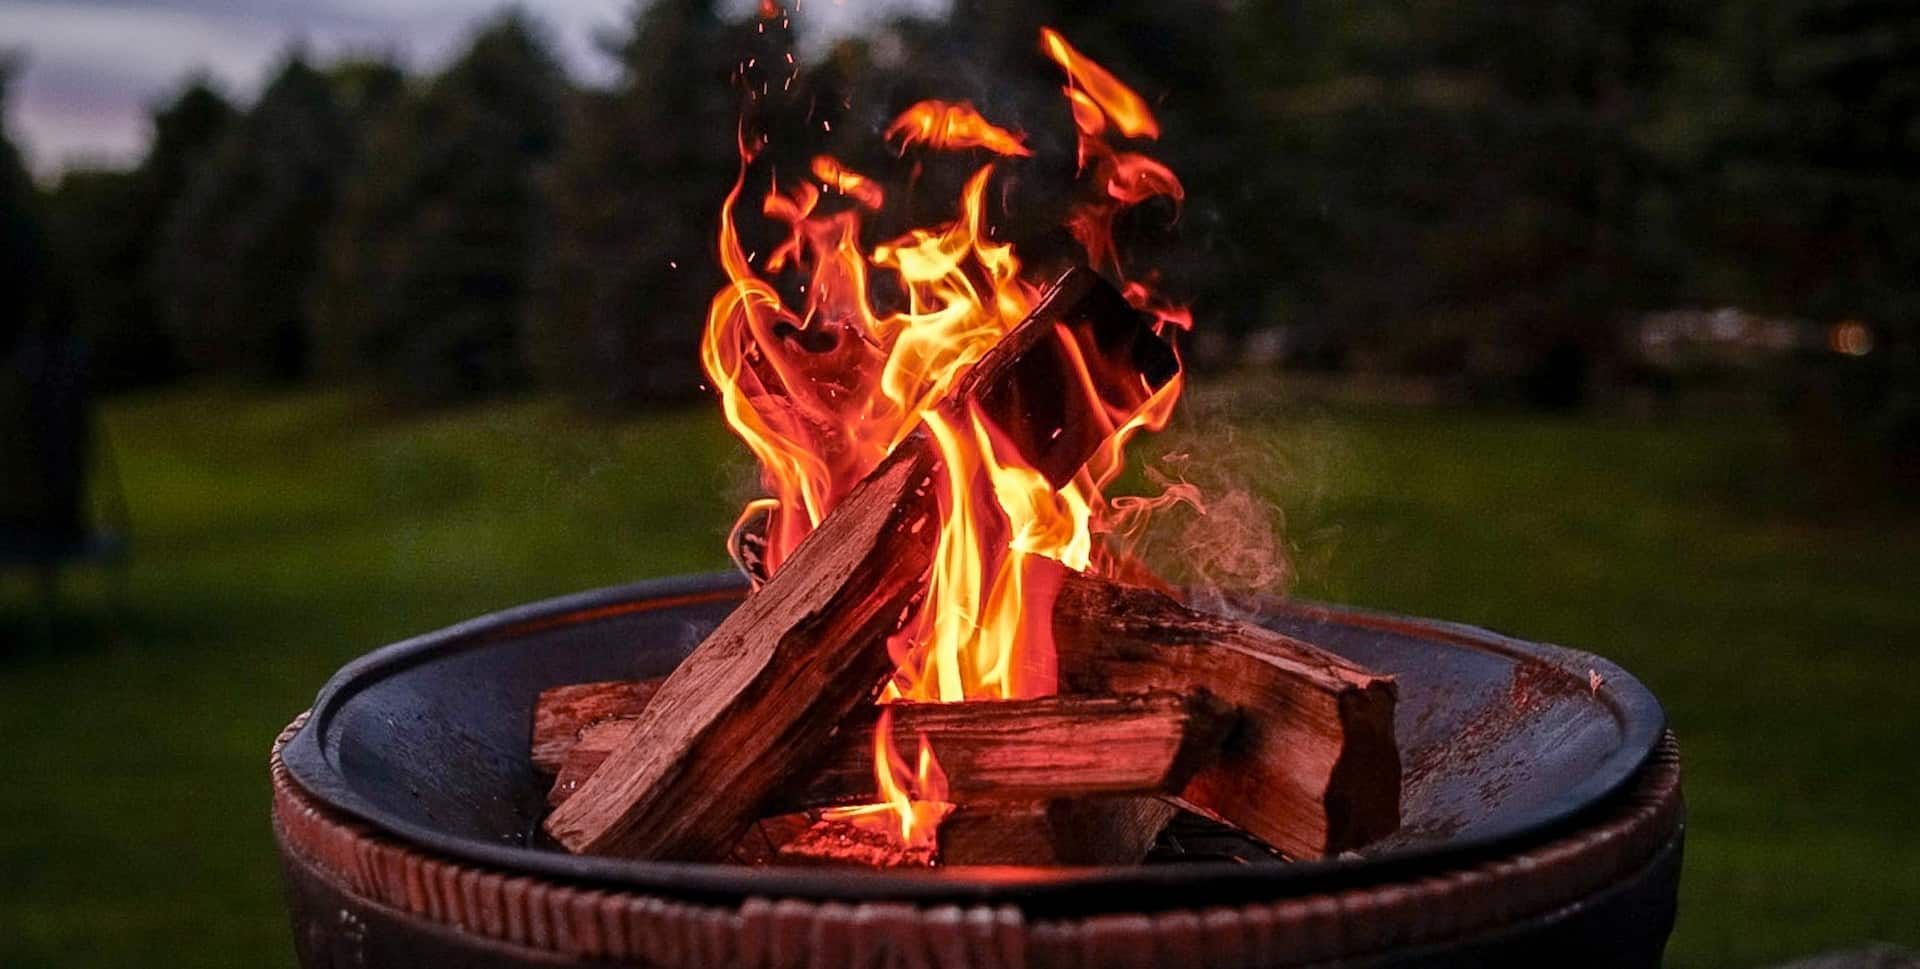 Chiminea Vs Fire Pit Compared - Wilderness Redefined